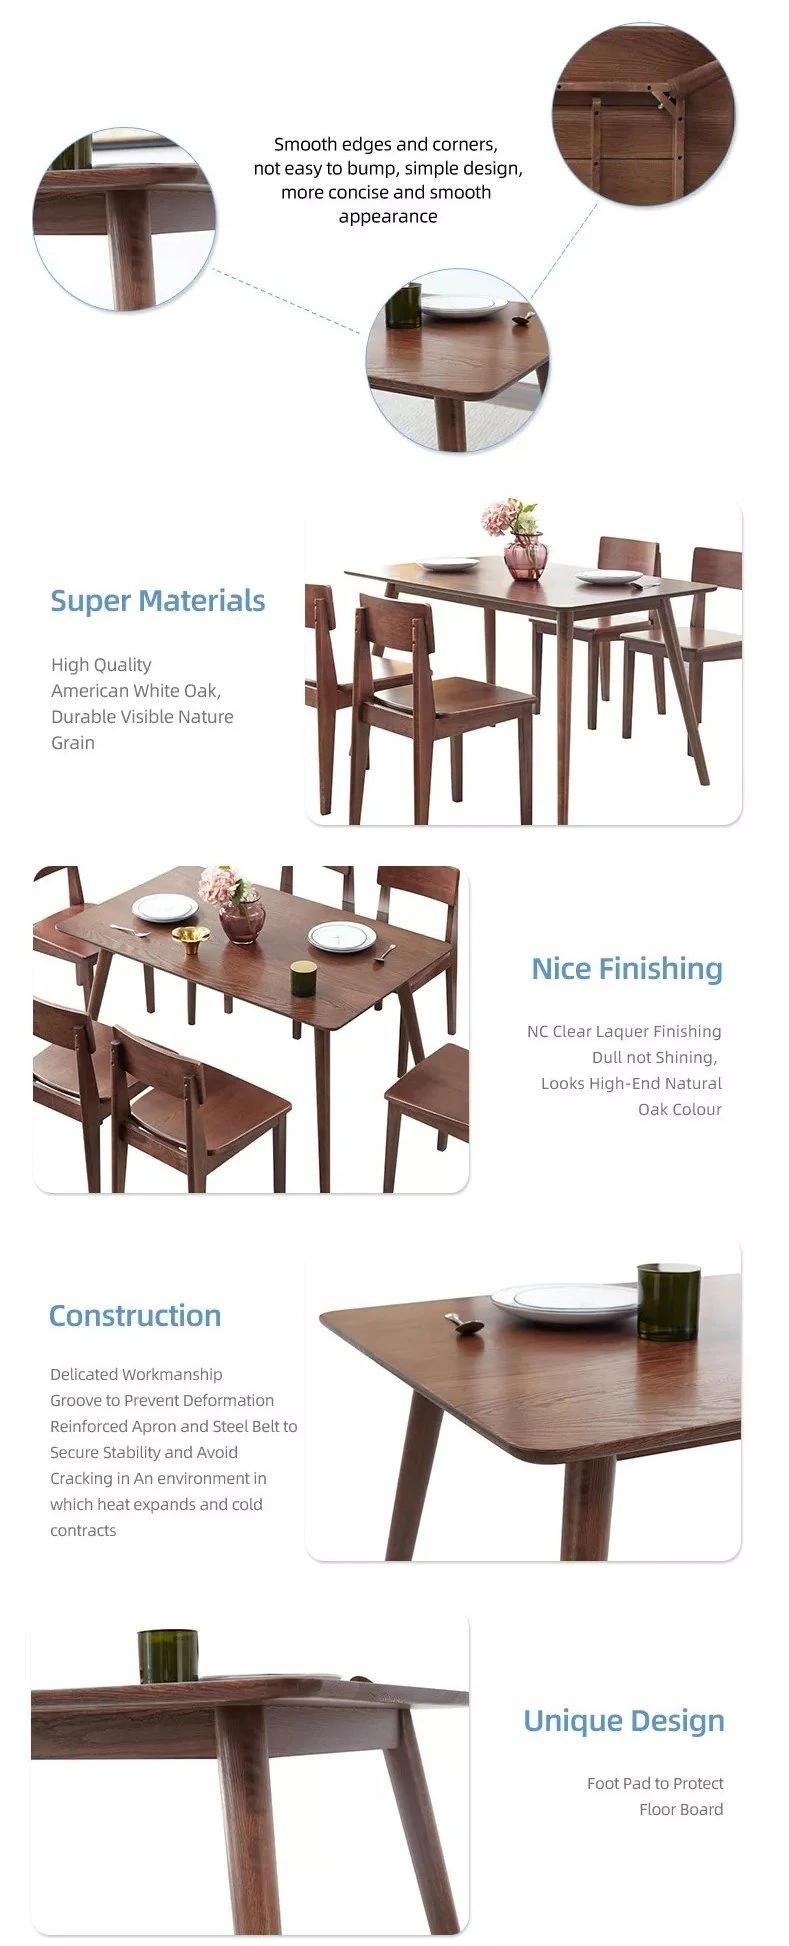 Furniture Modern Furniture Table Home Furniture Wooden Furniture Scandinavian Kitchen Set Room Furniture Chairs and Solid Oak Wood Slab Style Dining Table